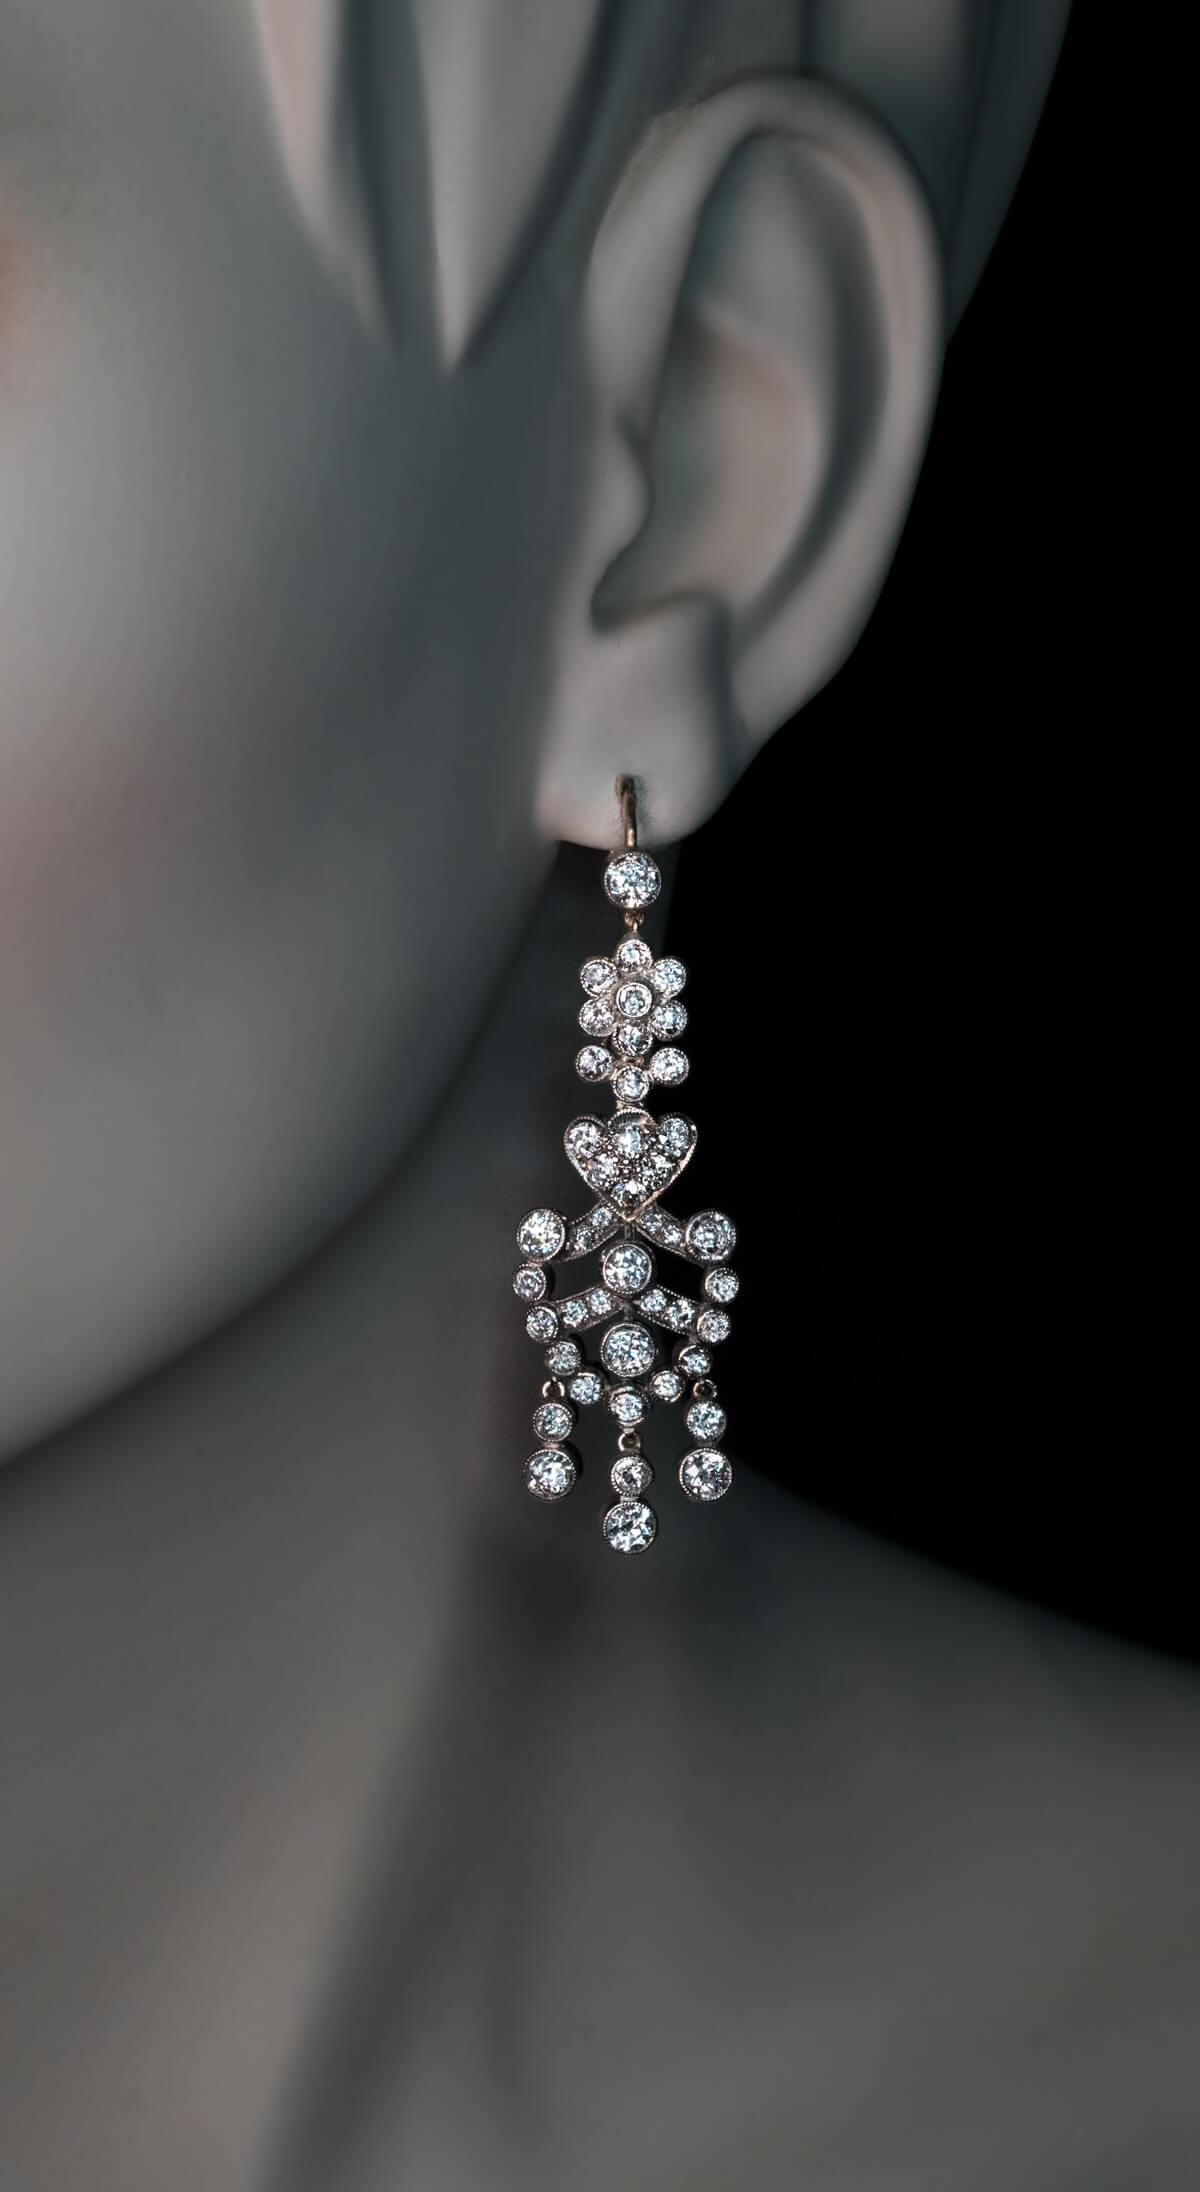 Circa 1900

These Belle Epoque dangle earrings are crafted in silver-topped 14K gold (front – silver, back – gold). The earrings are bezel-set with sparkling Old European cut diamonds of various sizes (G-H-I color, mostly VS2-SI1